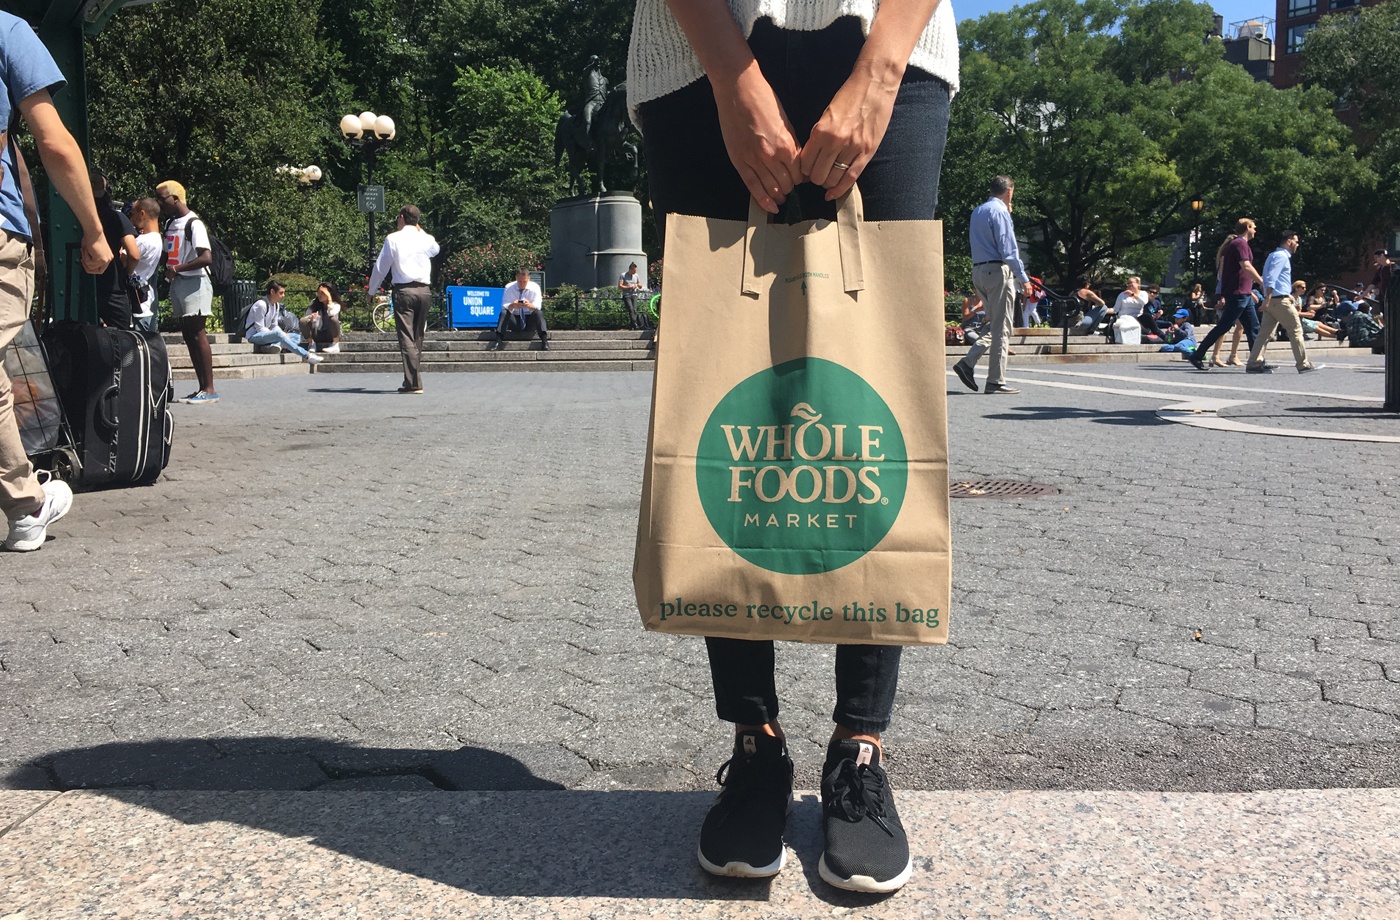 Amazon Prime members get Whole Foods discounts